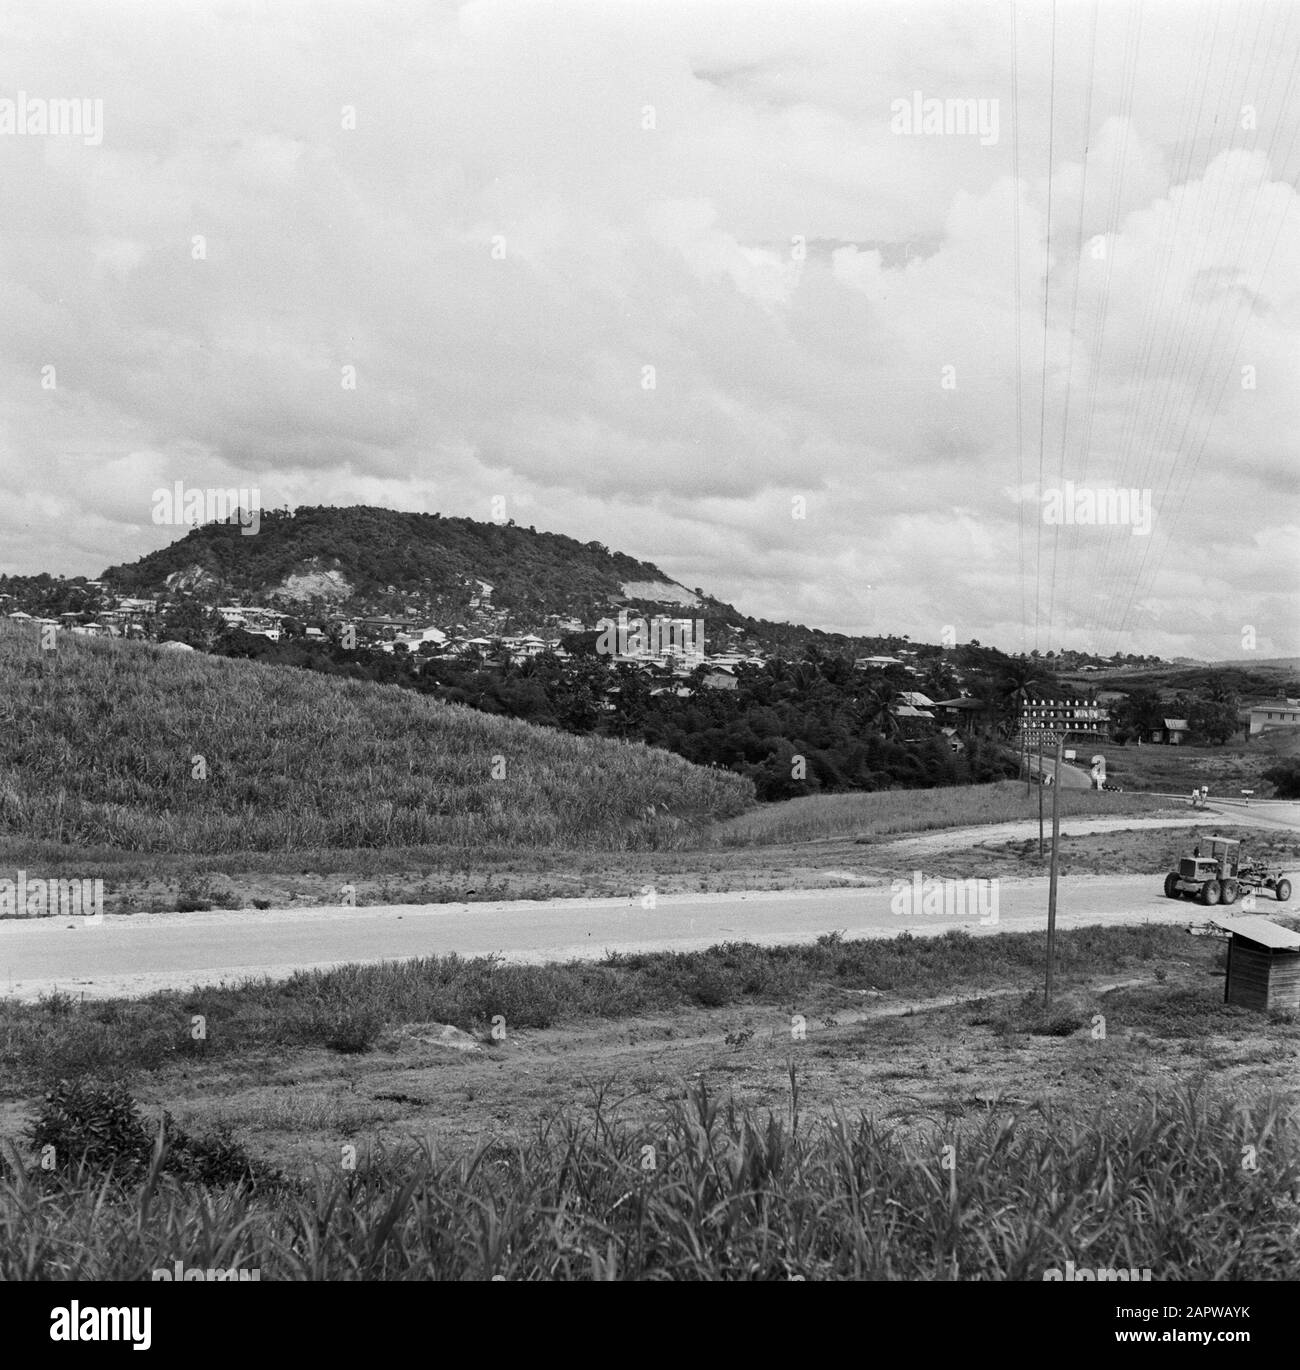 Dutch Antilles and Suriname at the time of the royal visit of Queen Juliana and Prince Bernhard in 1955  Landscape near San Fernando on Trinidad Date: 1 October 1955 Location: San Fernando, Trinidad Keywords: landscapes Stock Photo